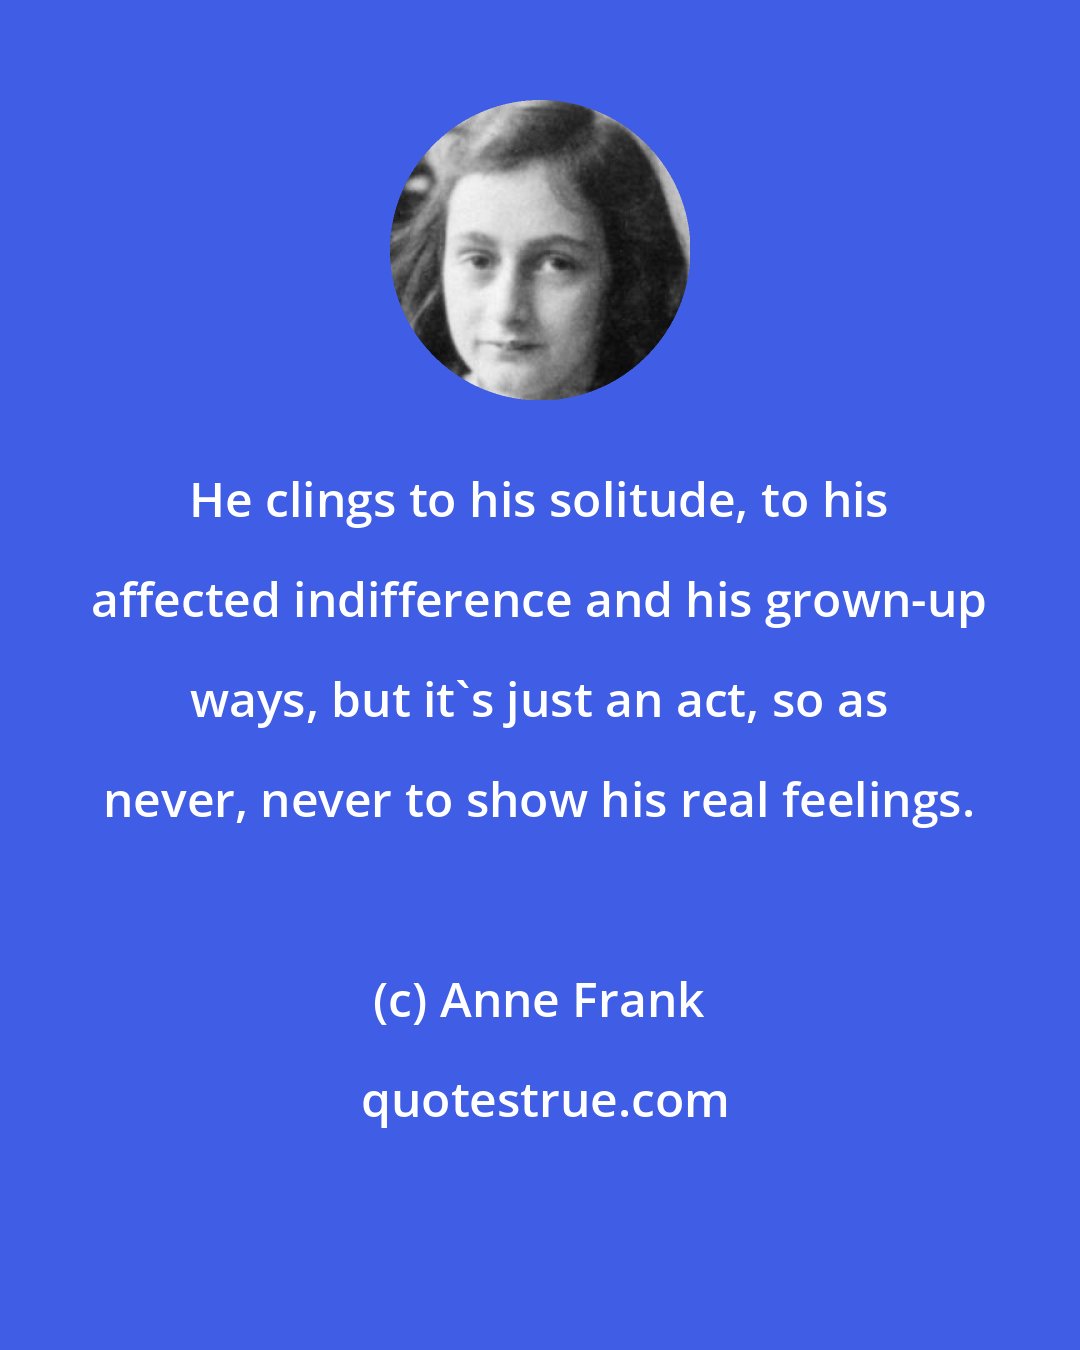 Anne Frank: He clings to his solitude, to his affected indifference and his grown-up ways, but it's just an act, so as never, never to show his real feelings.